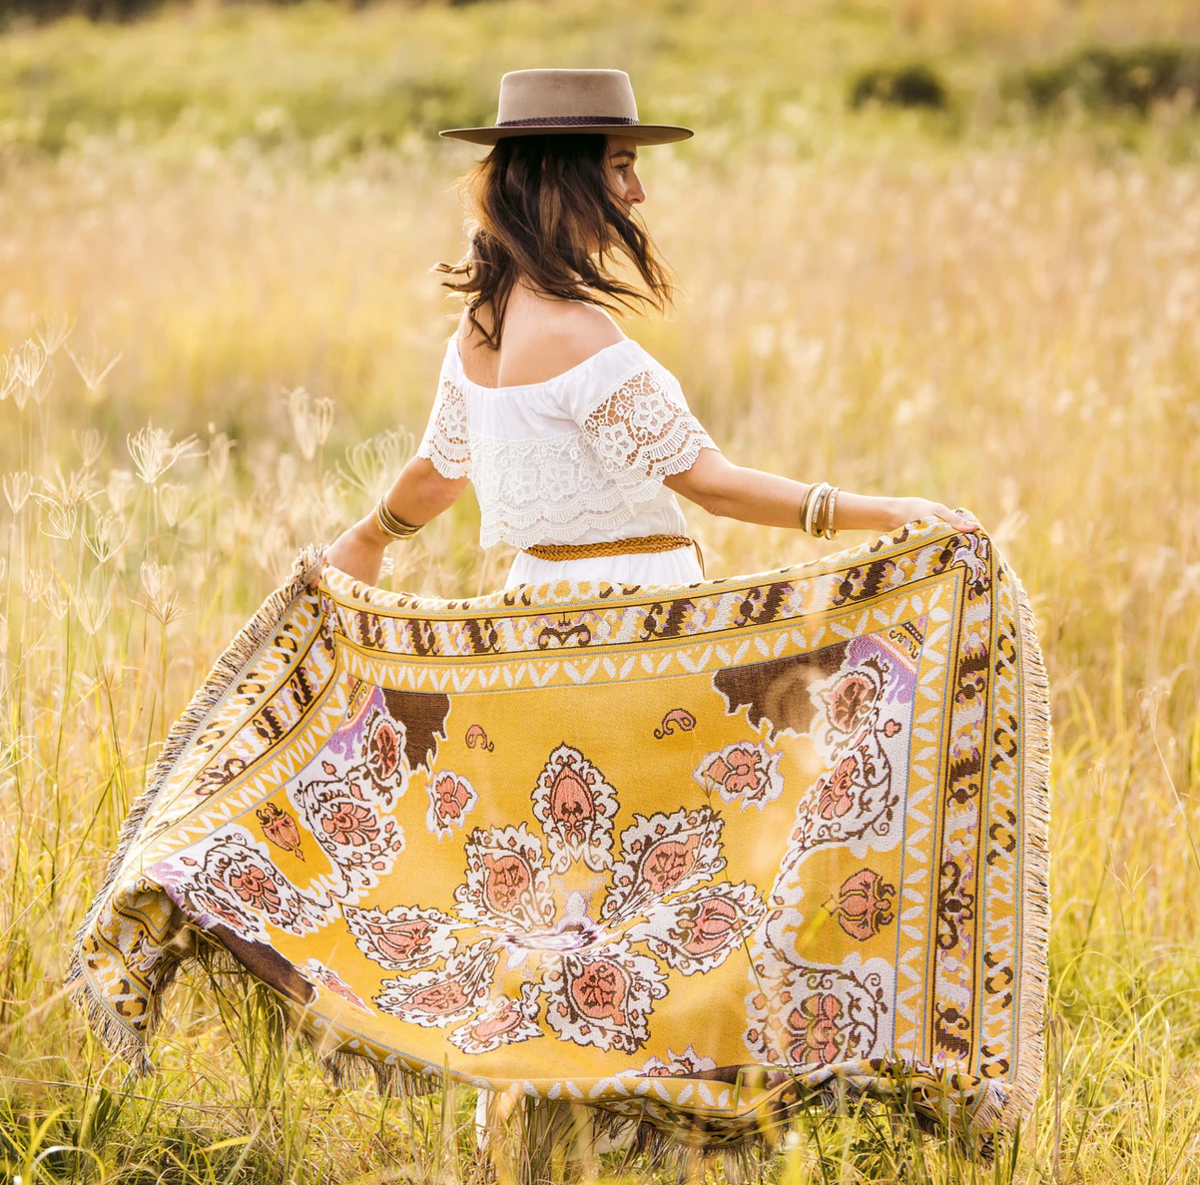 Picnic Rug | Here Comes The Sun by Hendeer